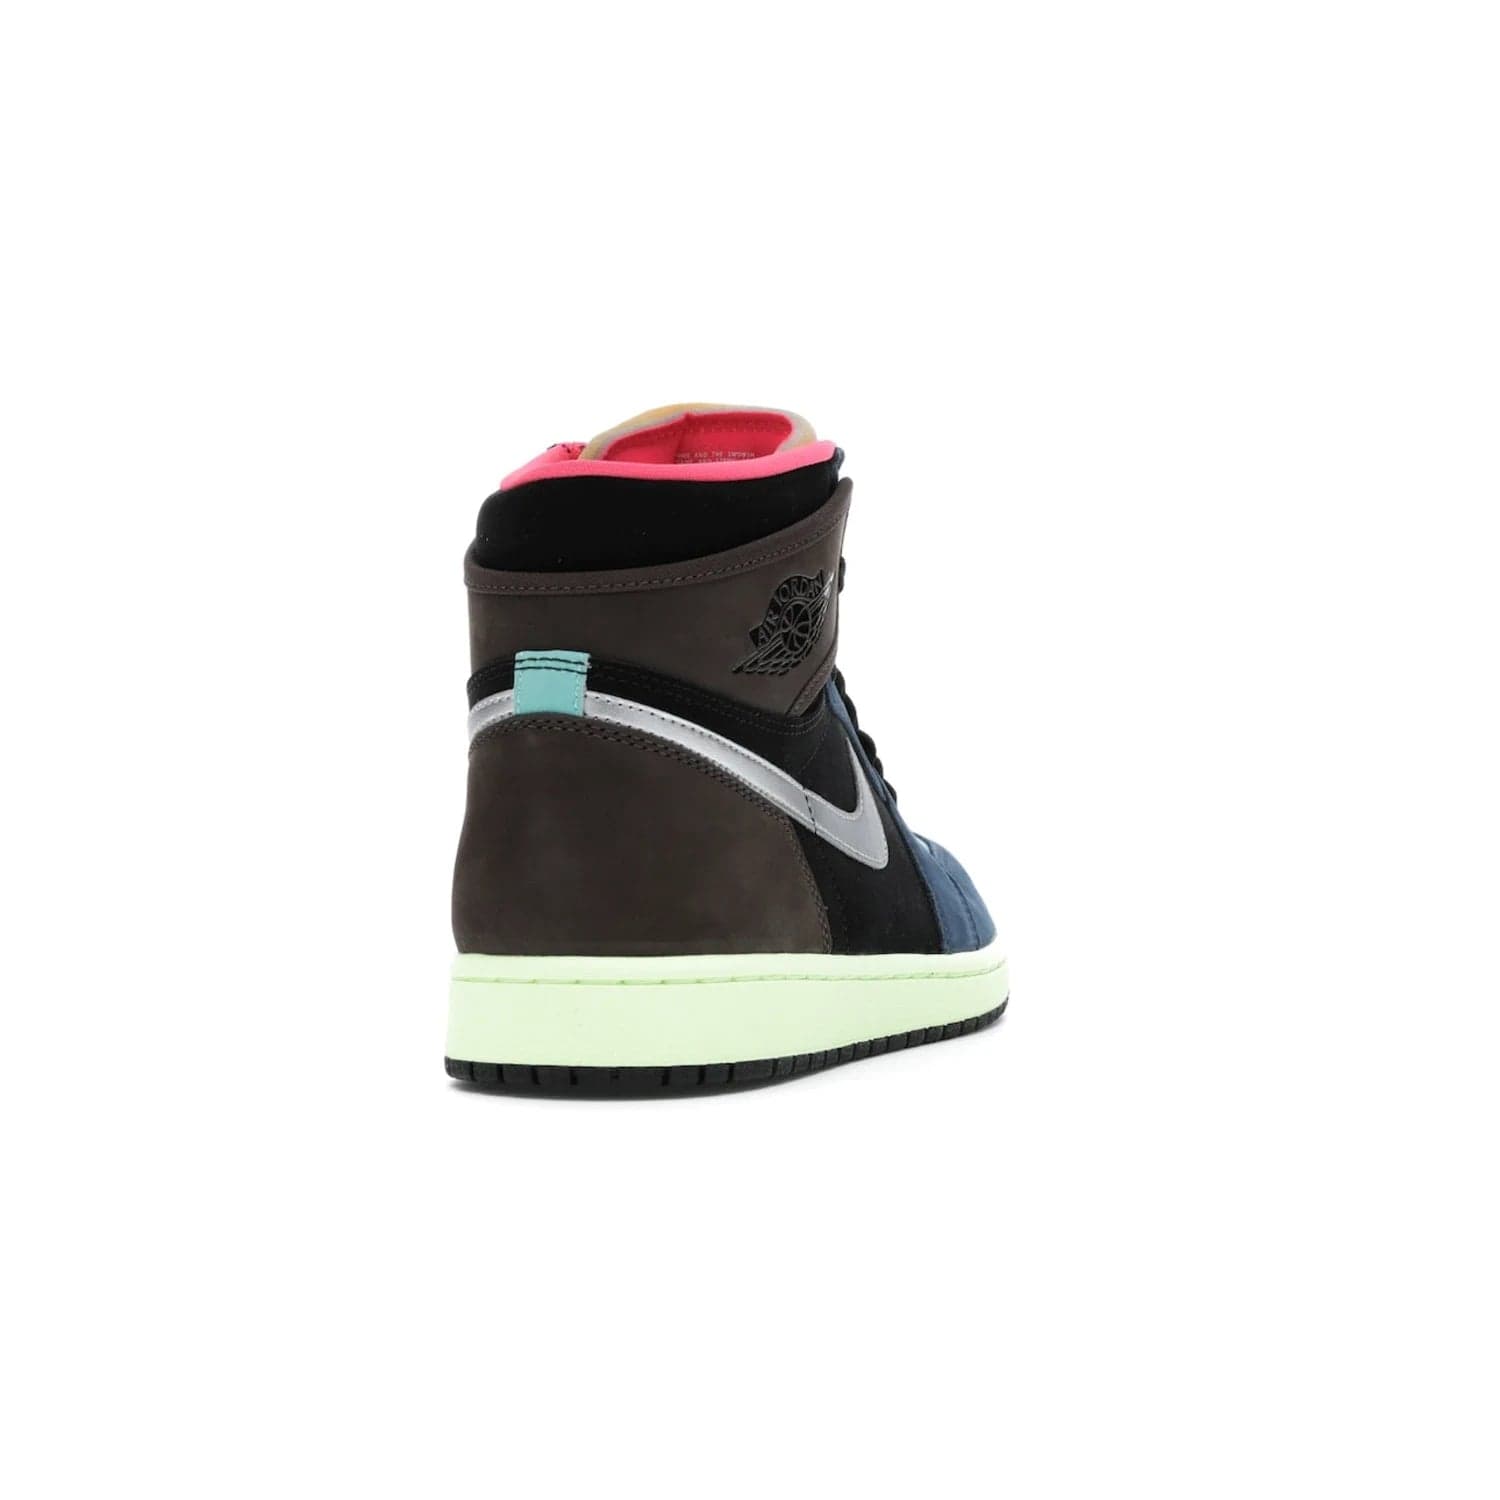 Jordan 1 Retro High Tokyo Bio Hack - Image 30 - Only at www.BallersClubKickz.com - Step up your sneaker game with the Air Jordan 1 Retro High Tokyo Bio Hack! Unique design featuring multiple materials and eye-catching colors. Metallic leather Swoosh and light green midsole for a stunning look. Available now for just $170.